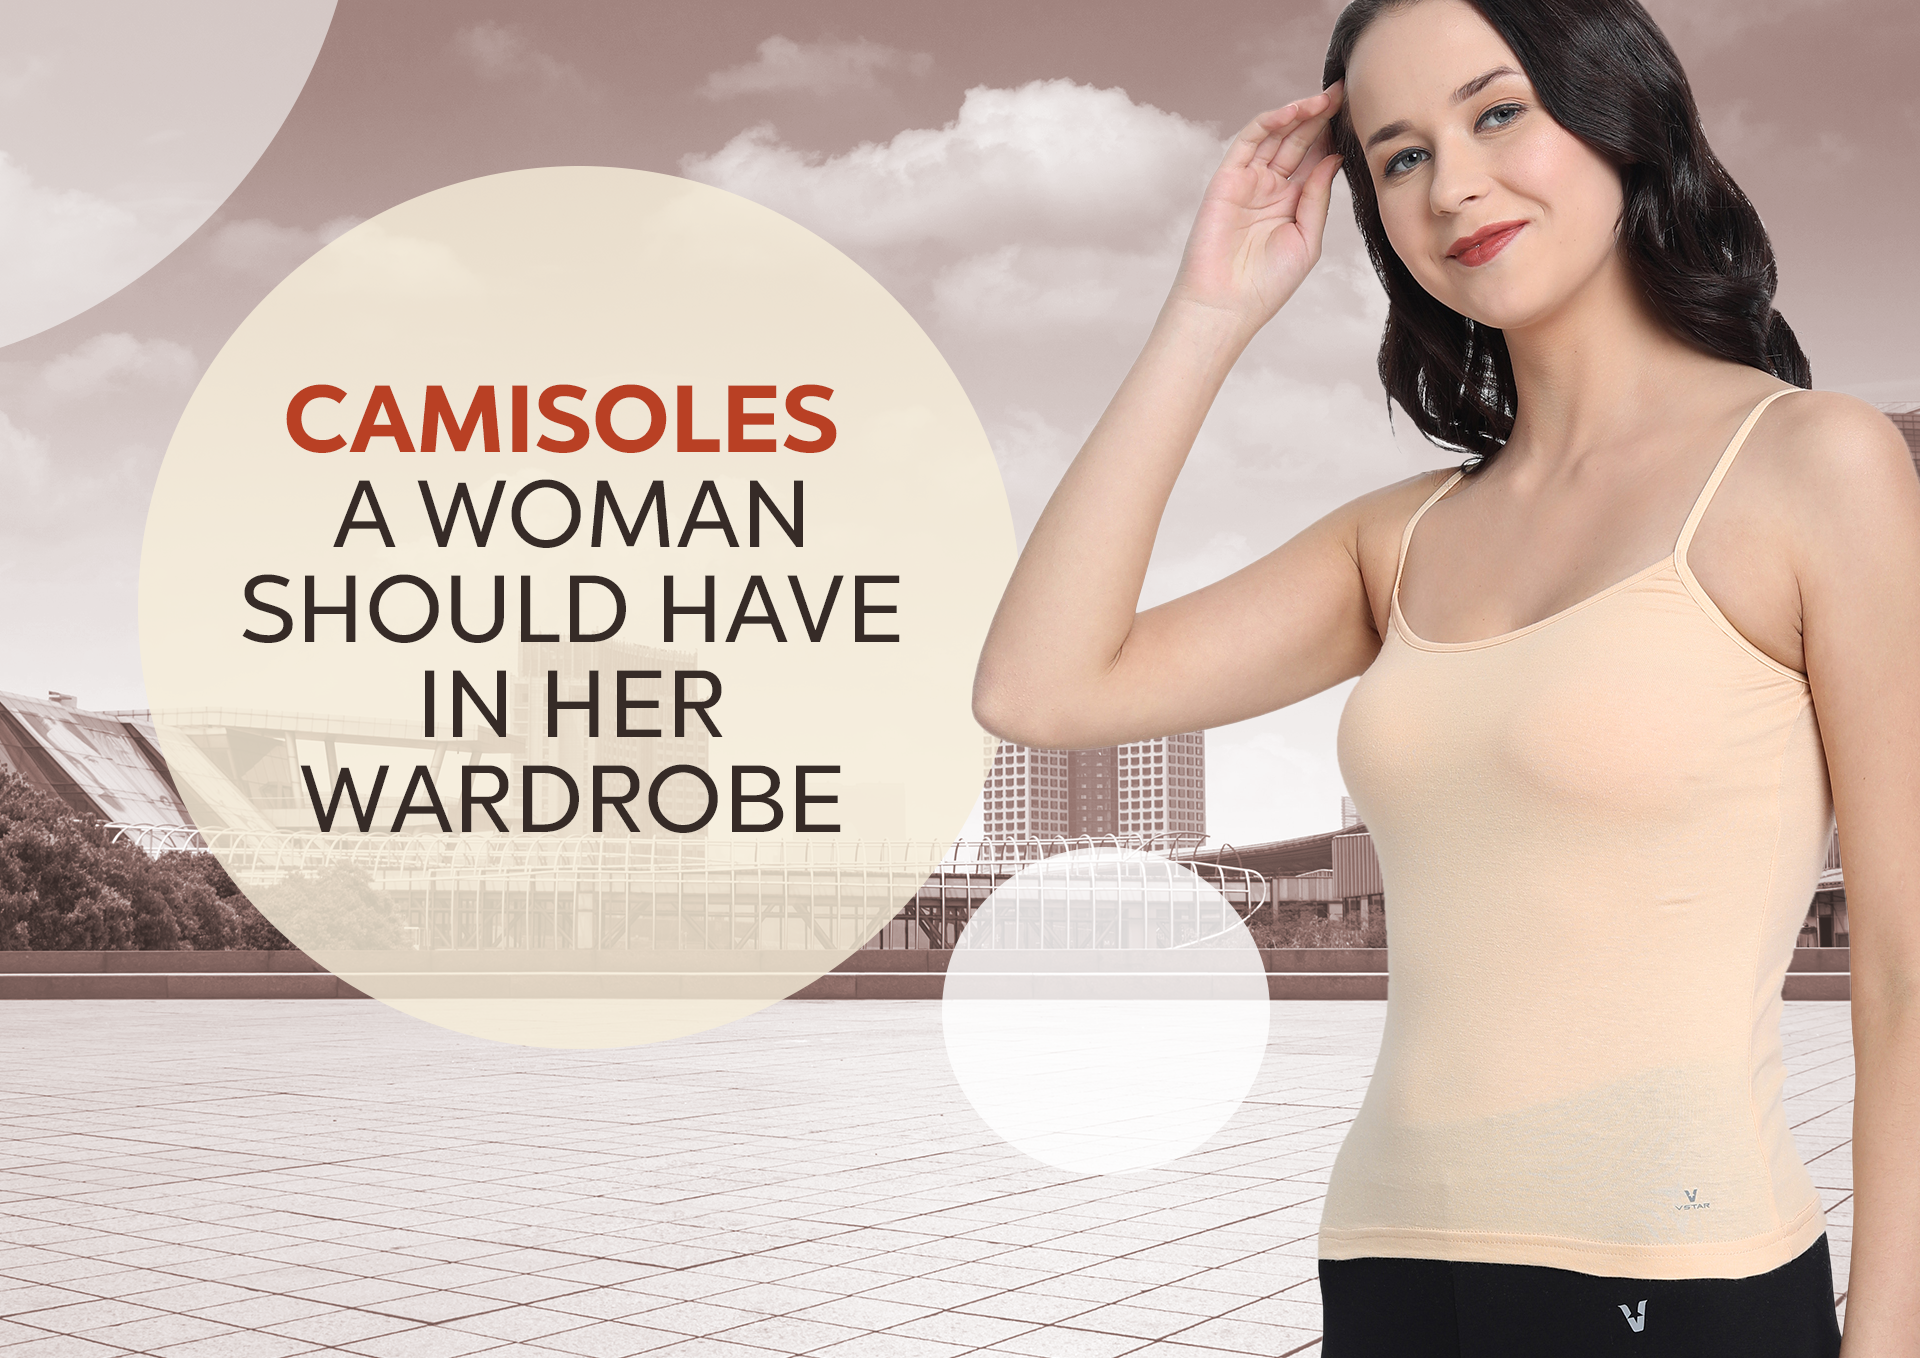 Does Shapewear Really Work? A Complete Guide to Shaper for Women